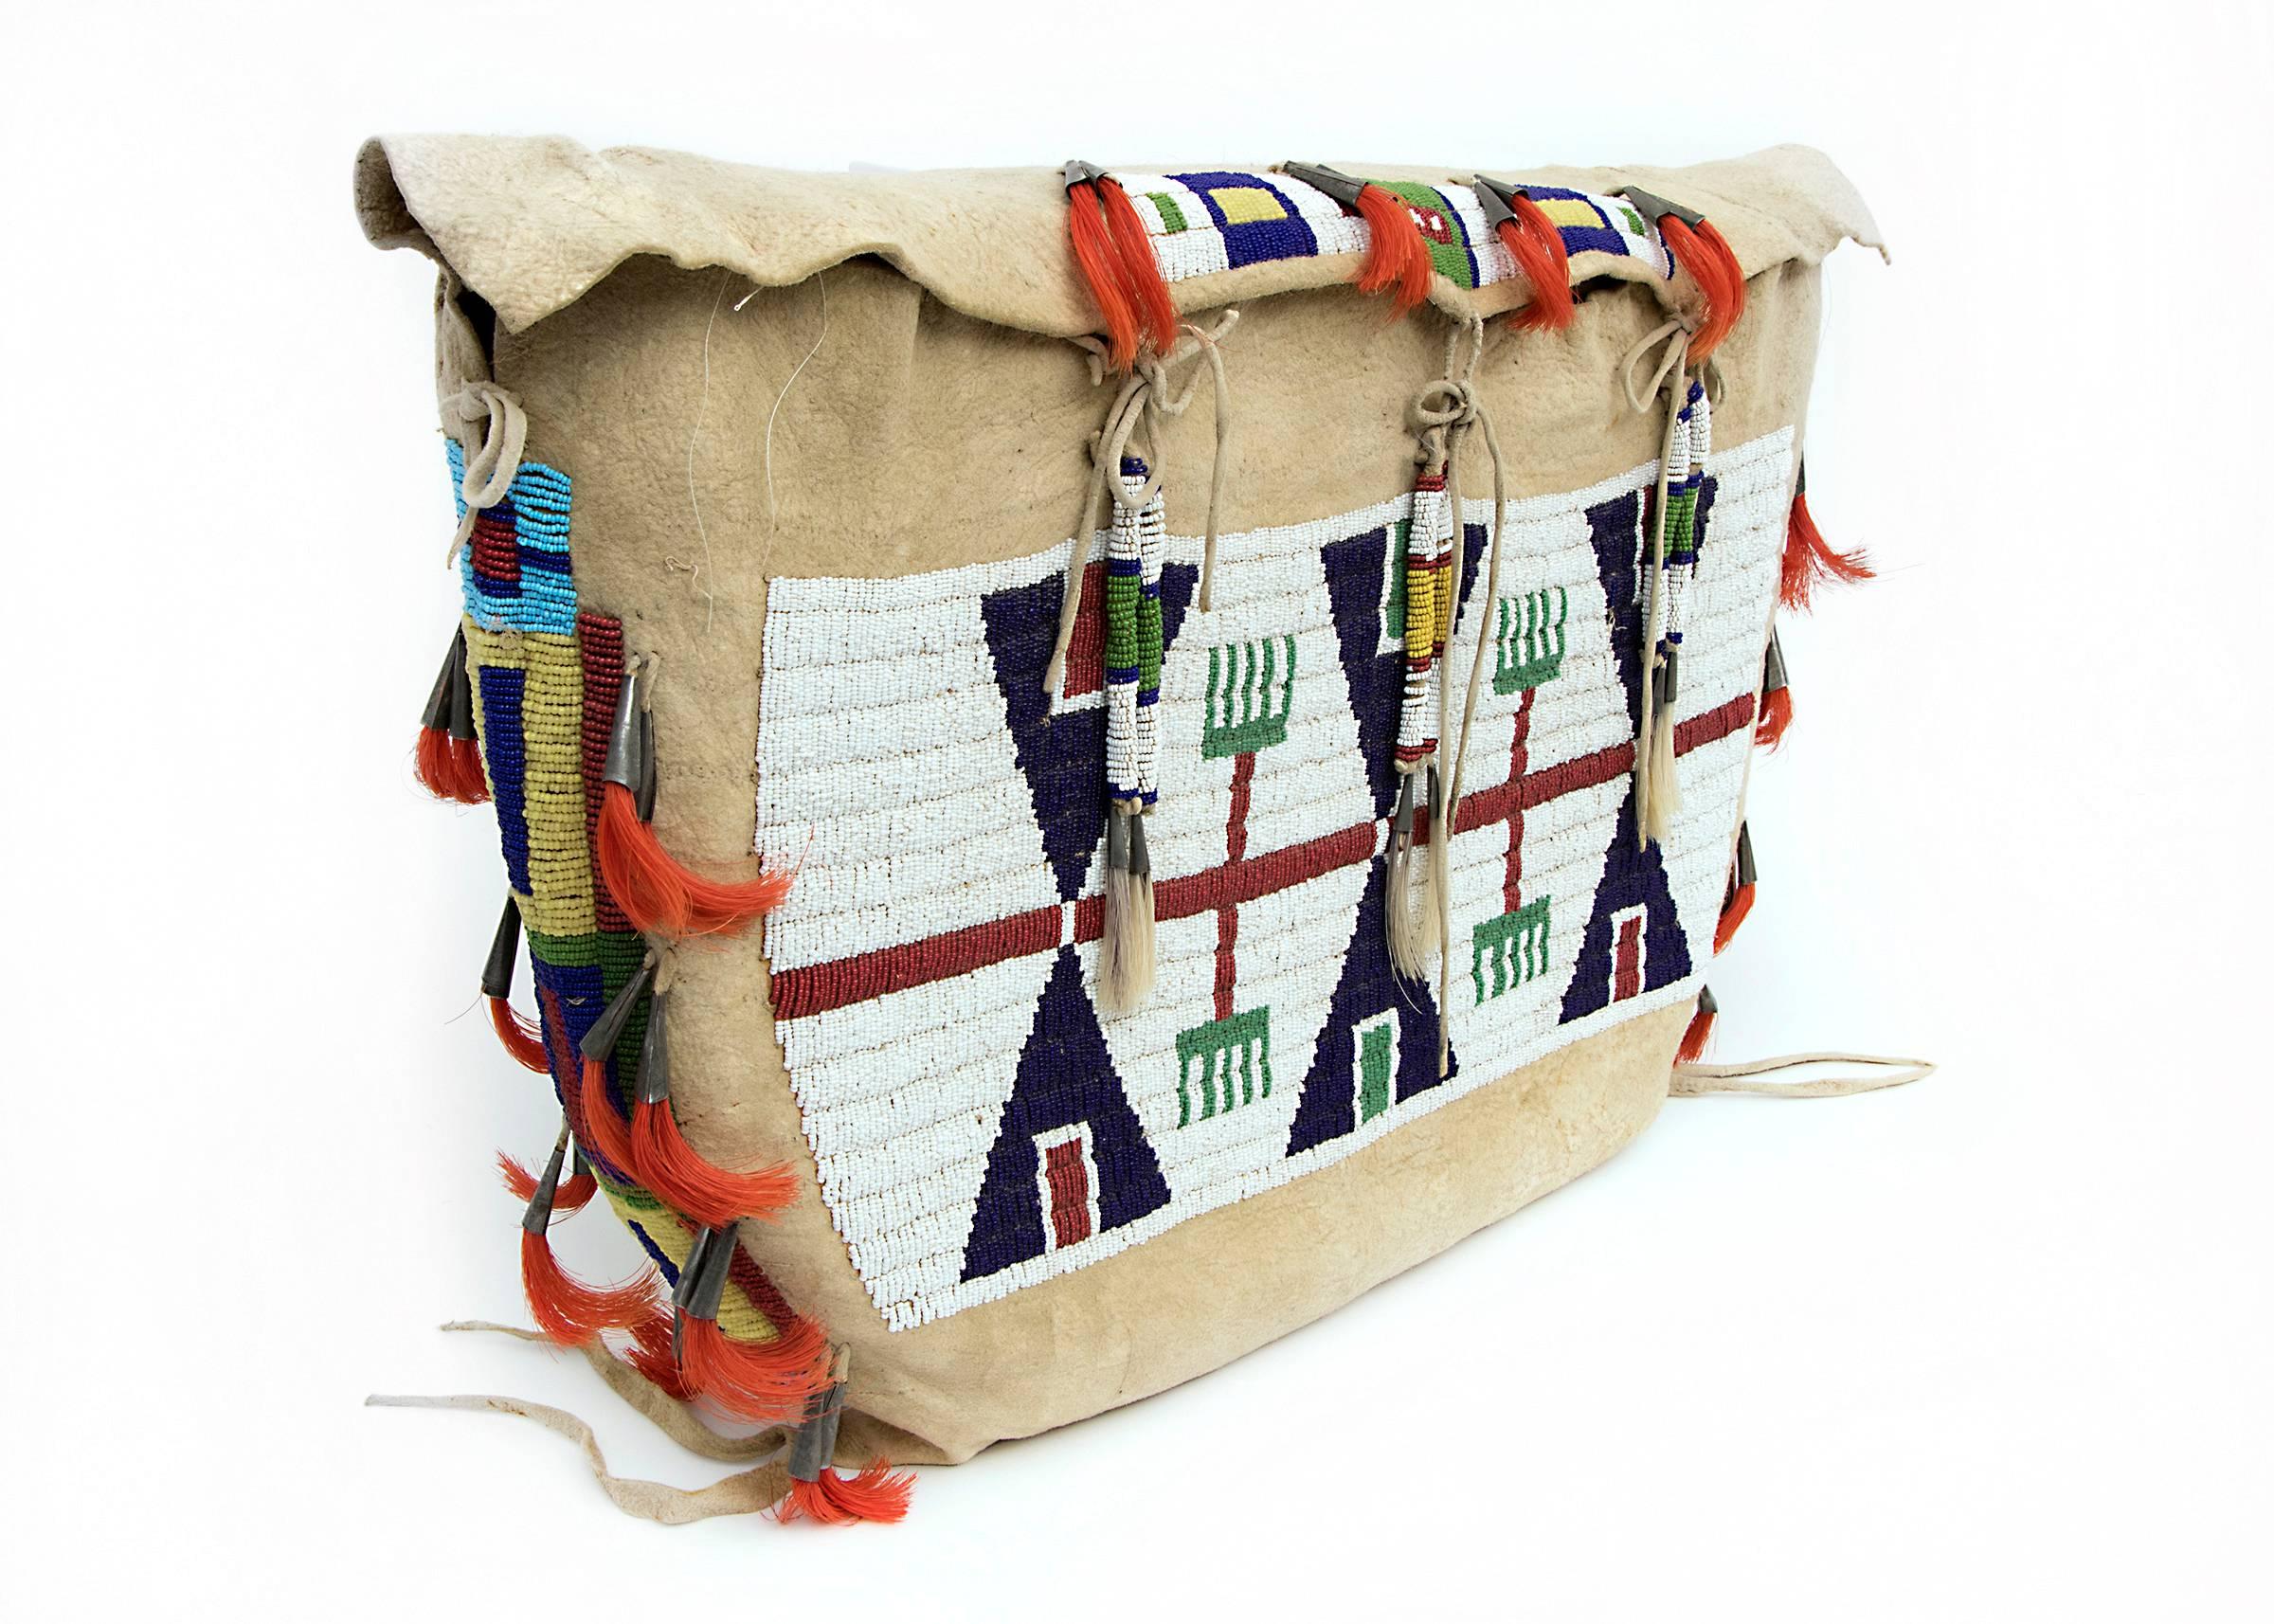 A pair of Sioux (Plains Indian) beaded possible bags (also referred to as tipi bags). Constructed of native tanned hide with glass trade beads, horse hair and tin-cone tinklers. Each Bag measures approximately 13 ½ x 24 inches. These make excellent